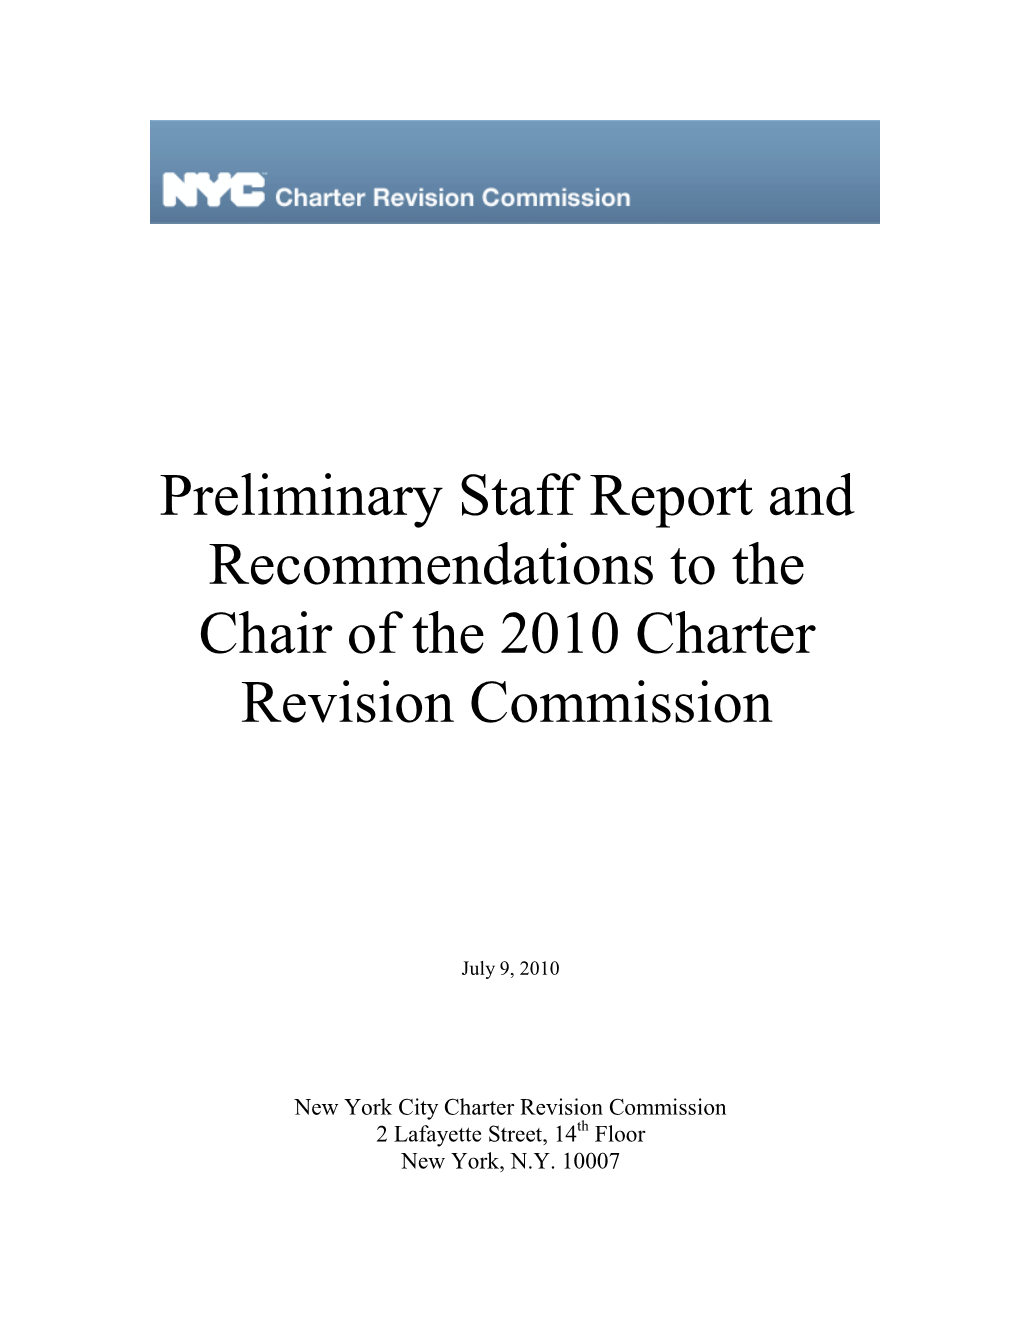 2010 Charter Revision Commission